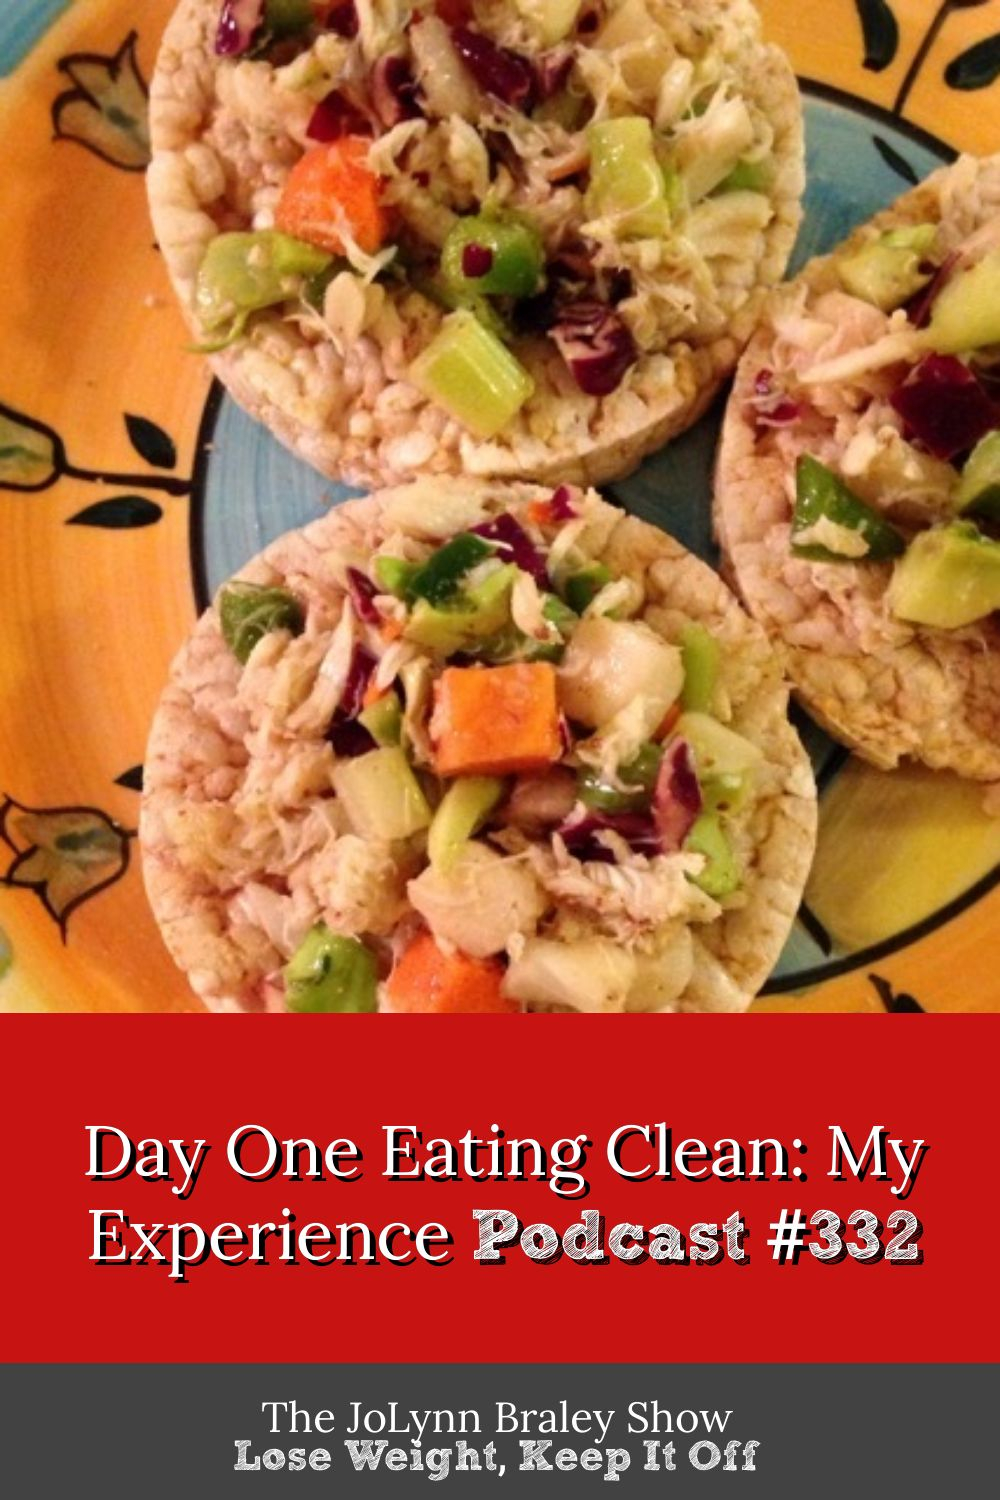 Day One Eating Clean: My Experience [Podcast #332]